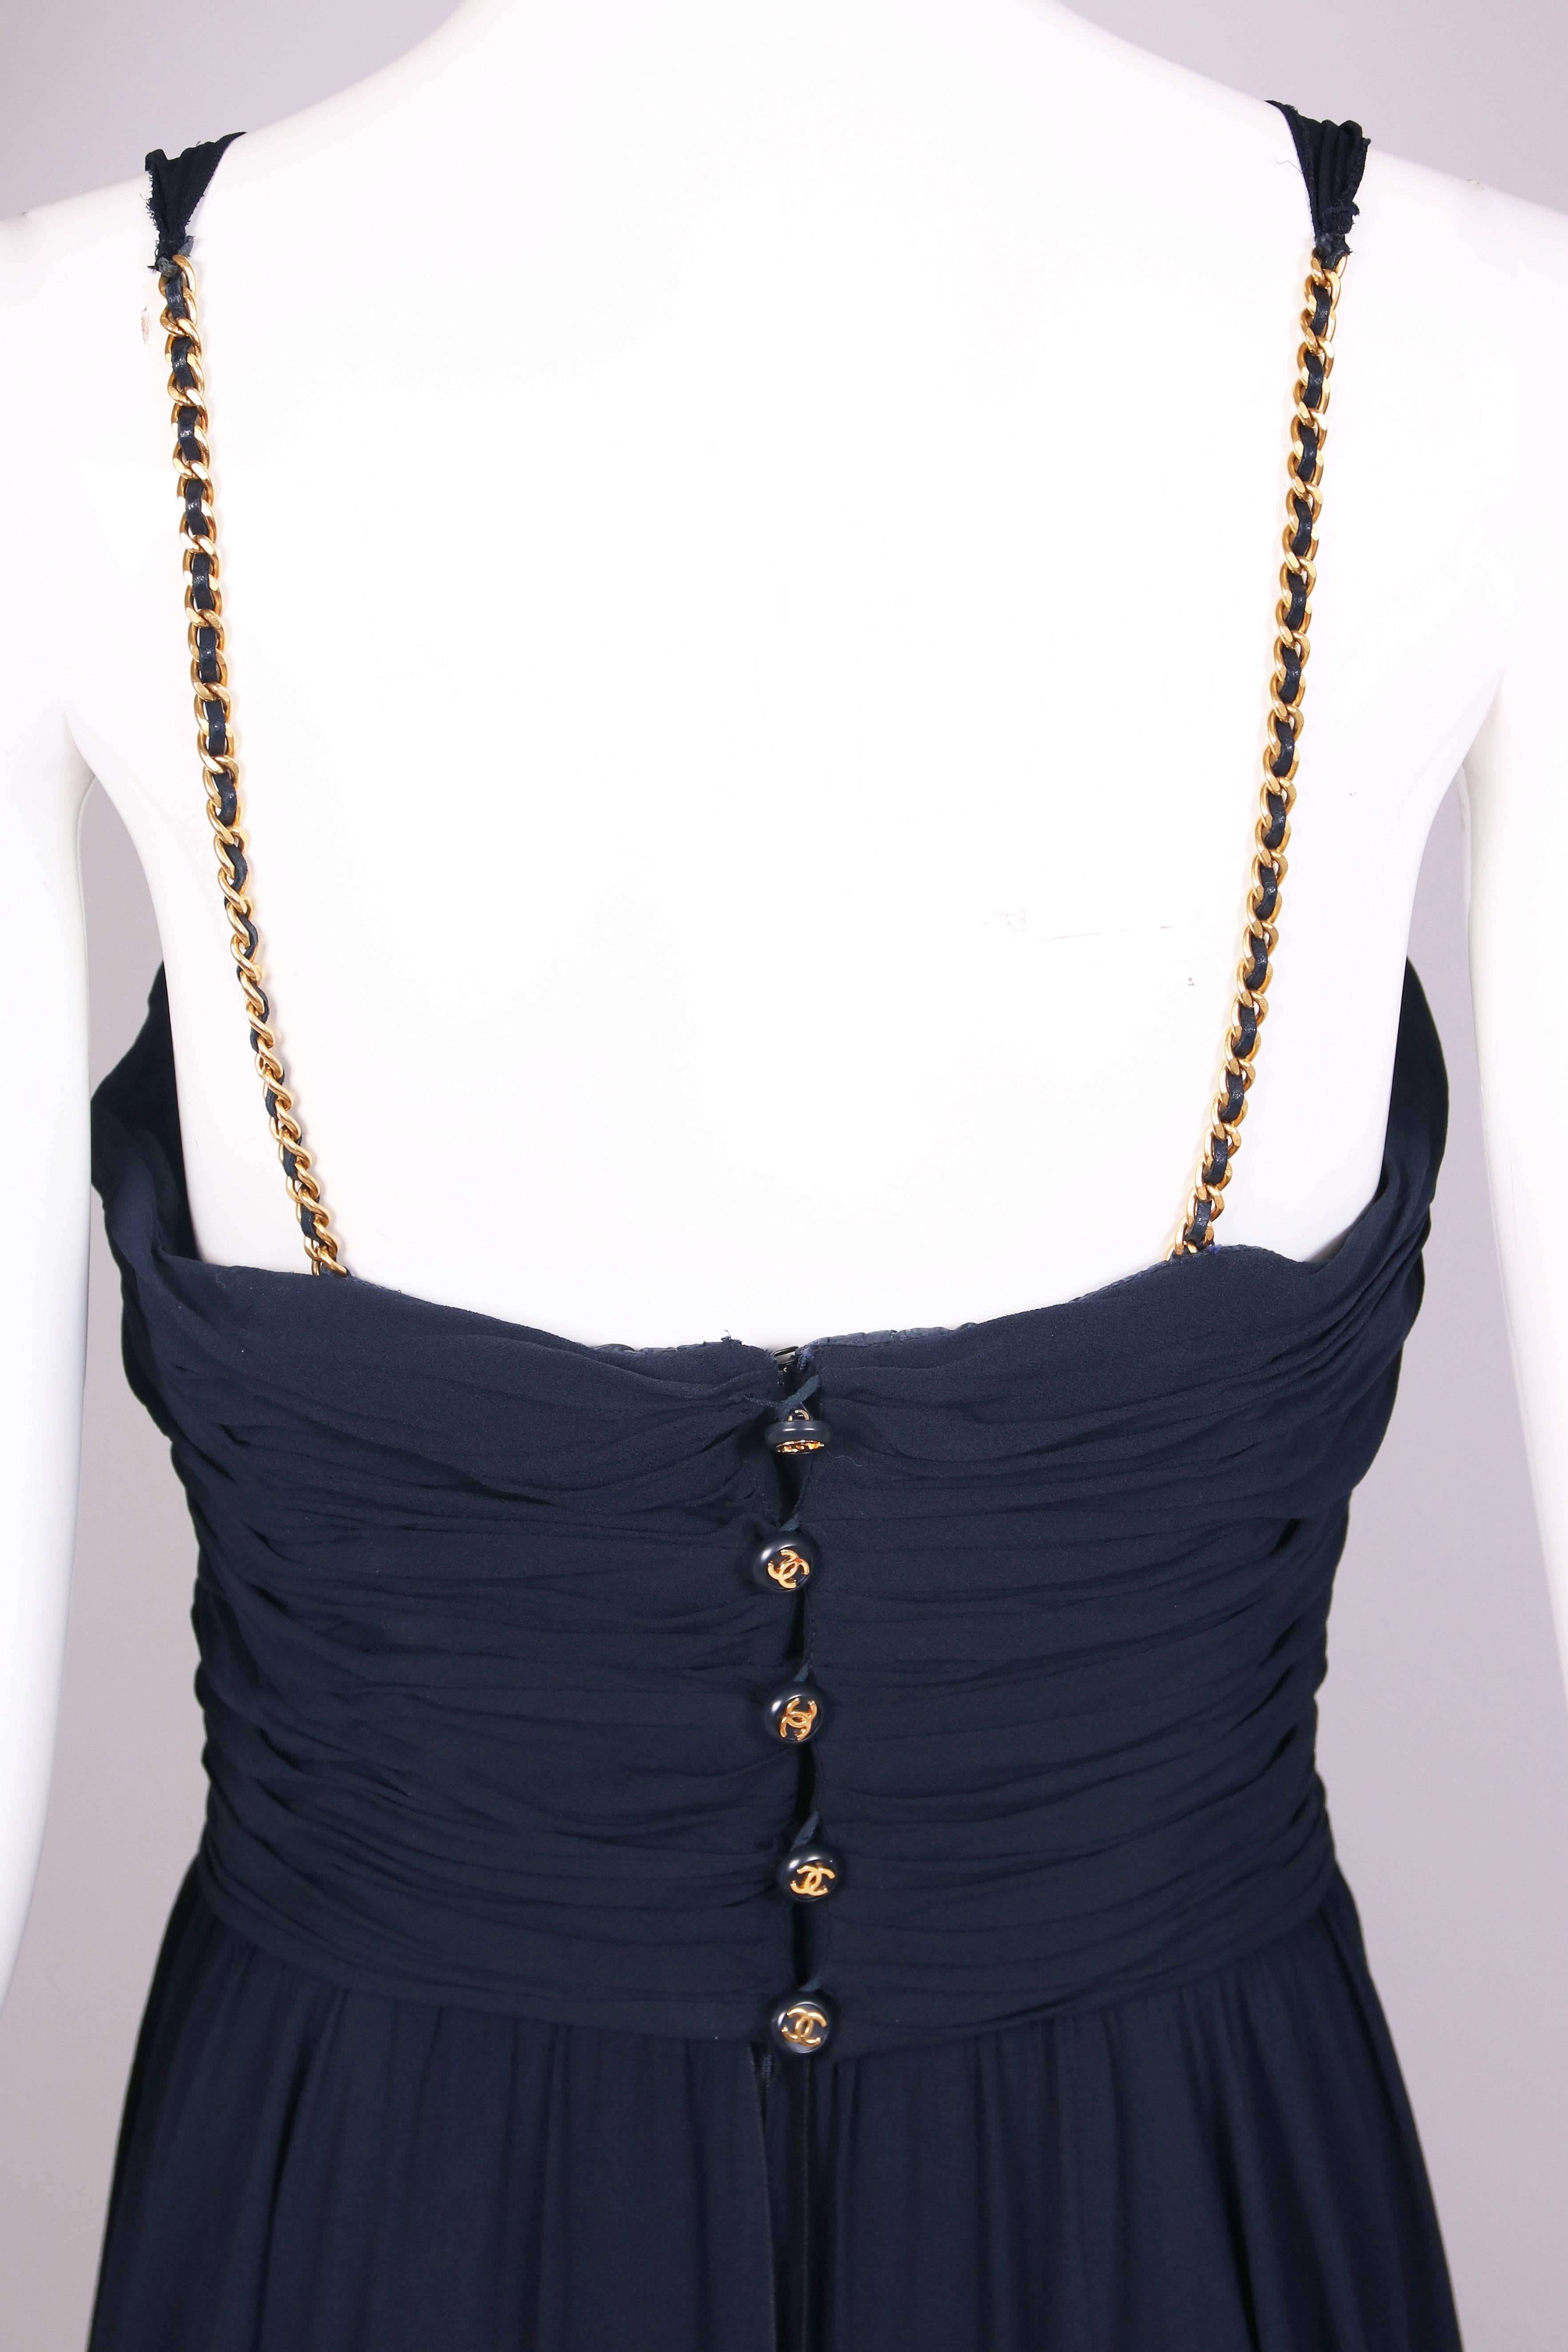 Women's Vintage Chanel Navy Crepe Layered Evening Gown w/Leather & Chain Straps